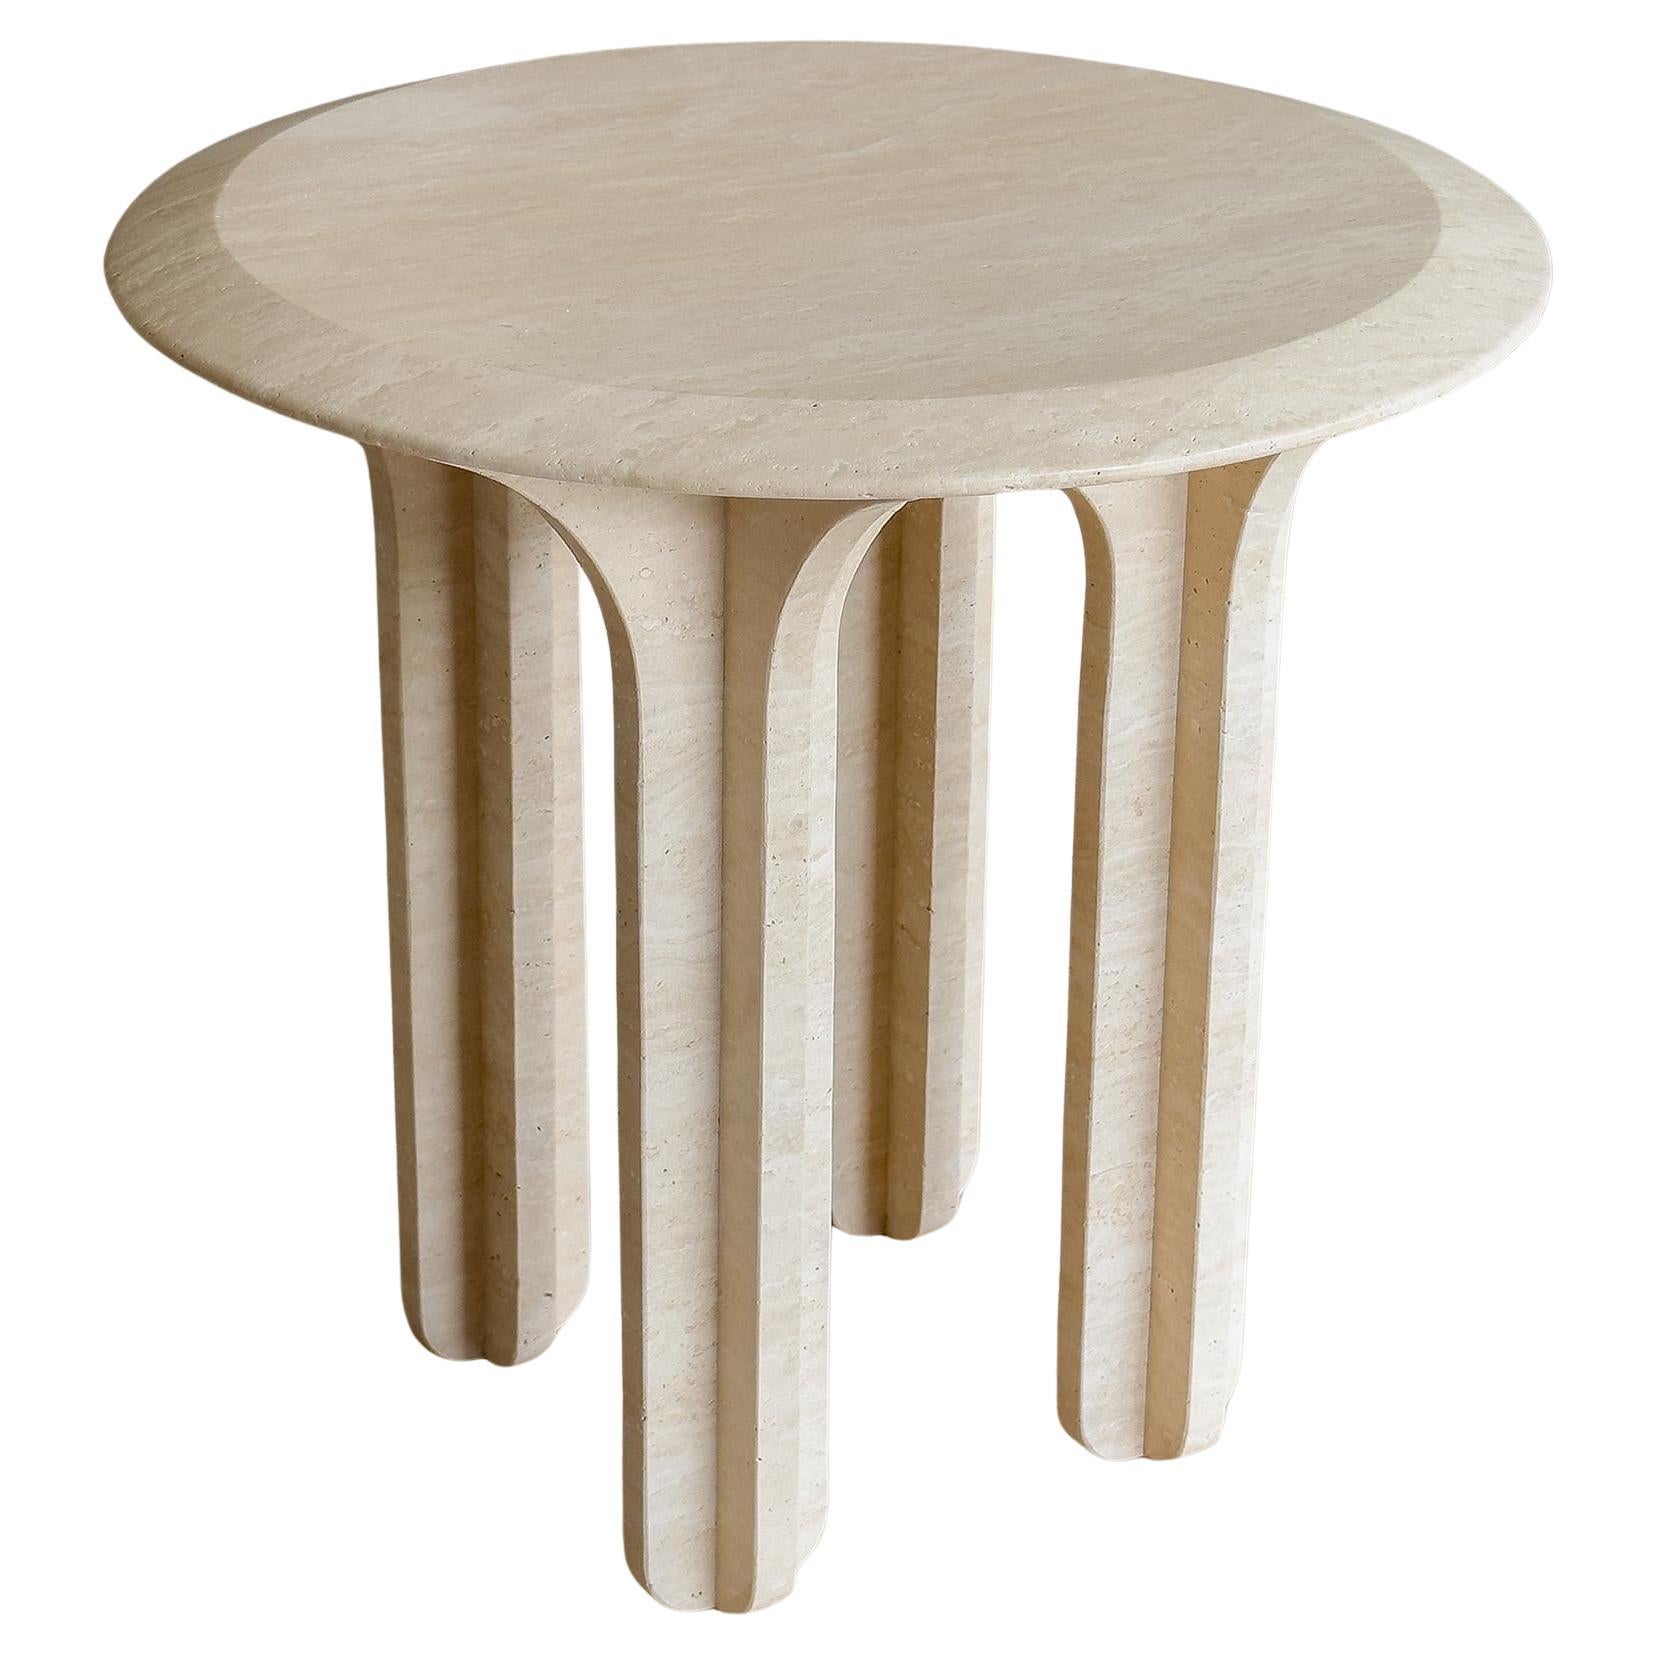 CURVO Table in Travertine by Meble Matters